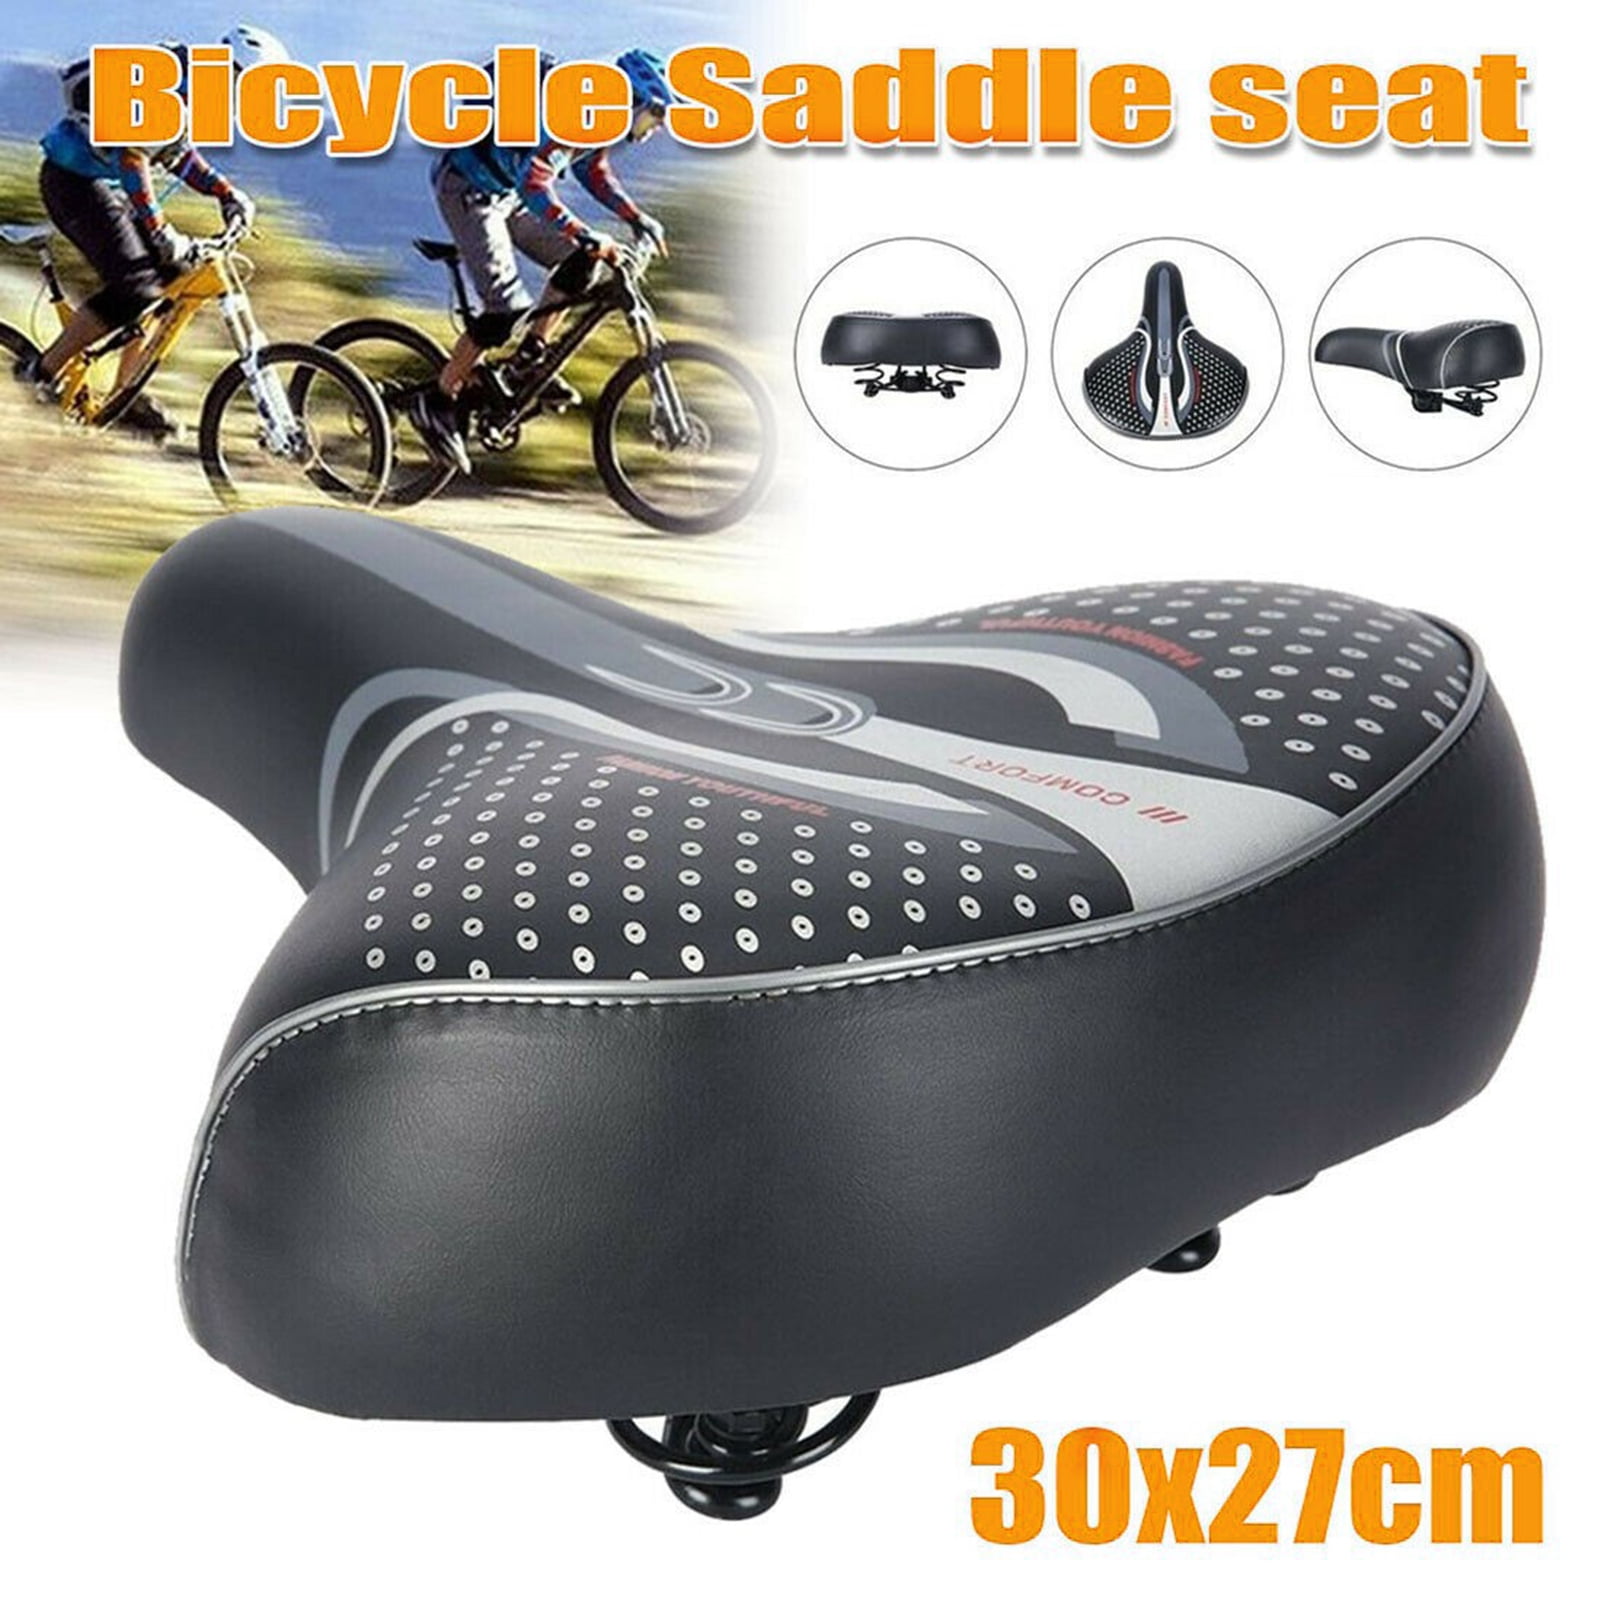 Man & Women Bike Seat Breathable Mountian Bike Seat Conforms to Ergonomic Design Shock Absorption and PU Leather Bike Waterproof Skidproof seat Suitable for Road Cycling and Mountain Biking 